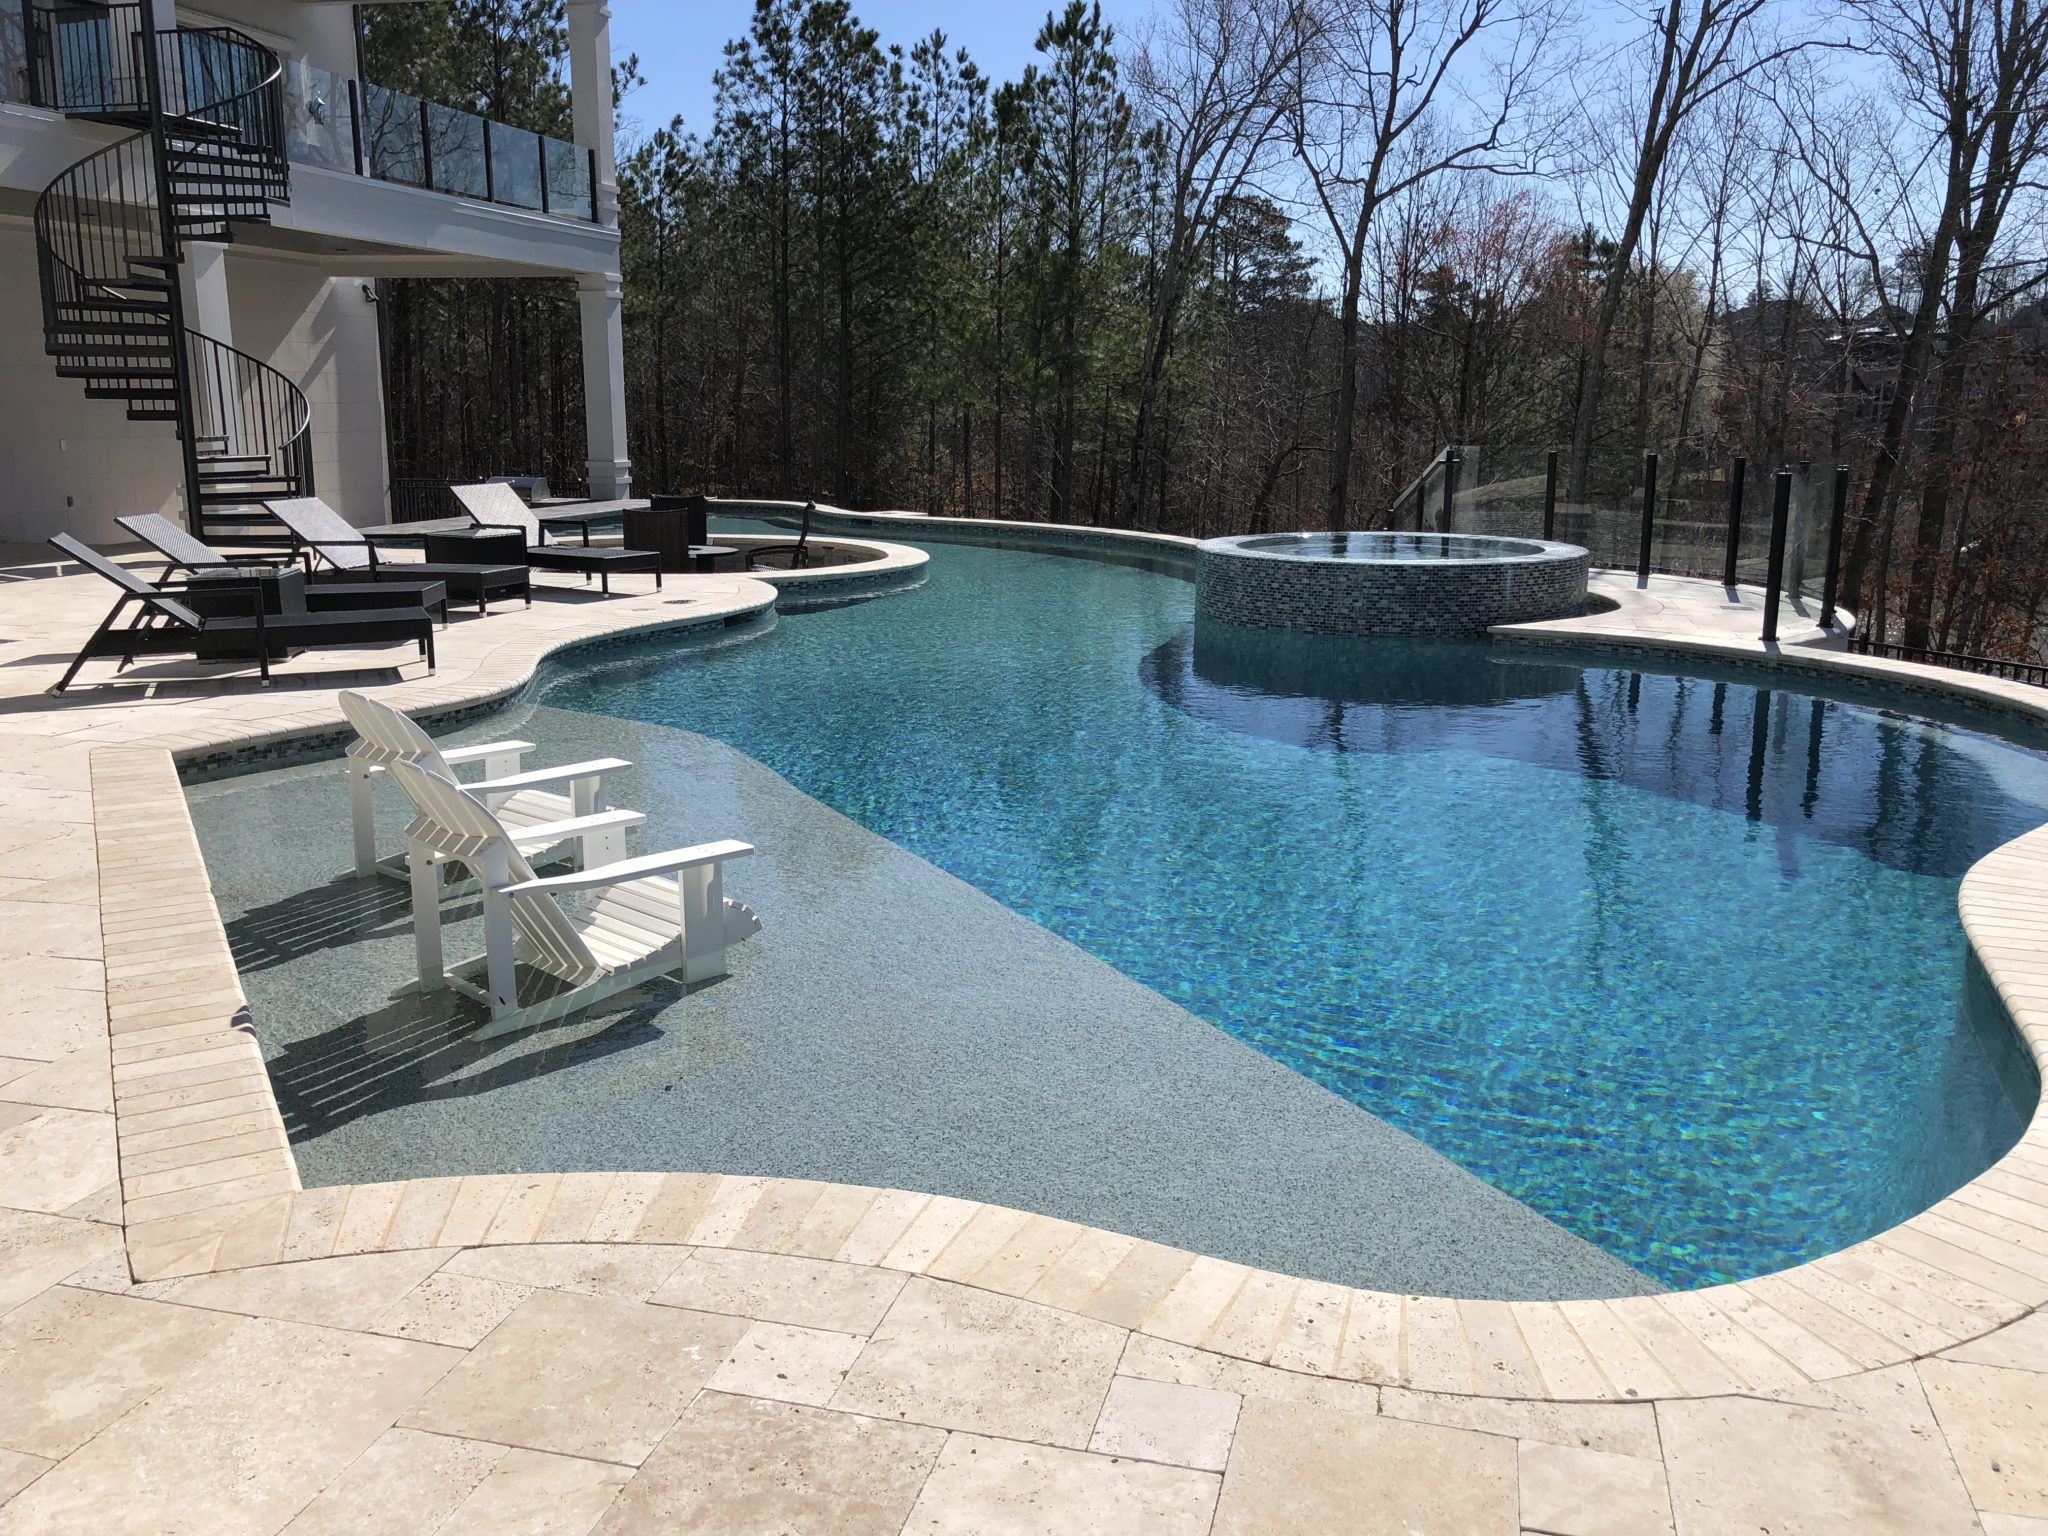 Aerial view of a custom modern freeform pool with clean lines and minimalist design.